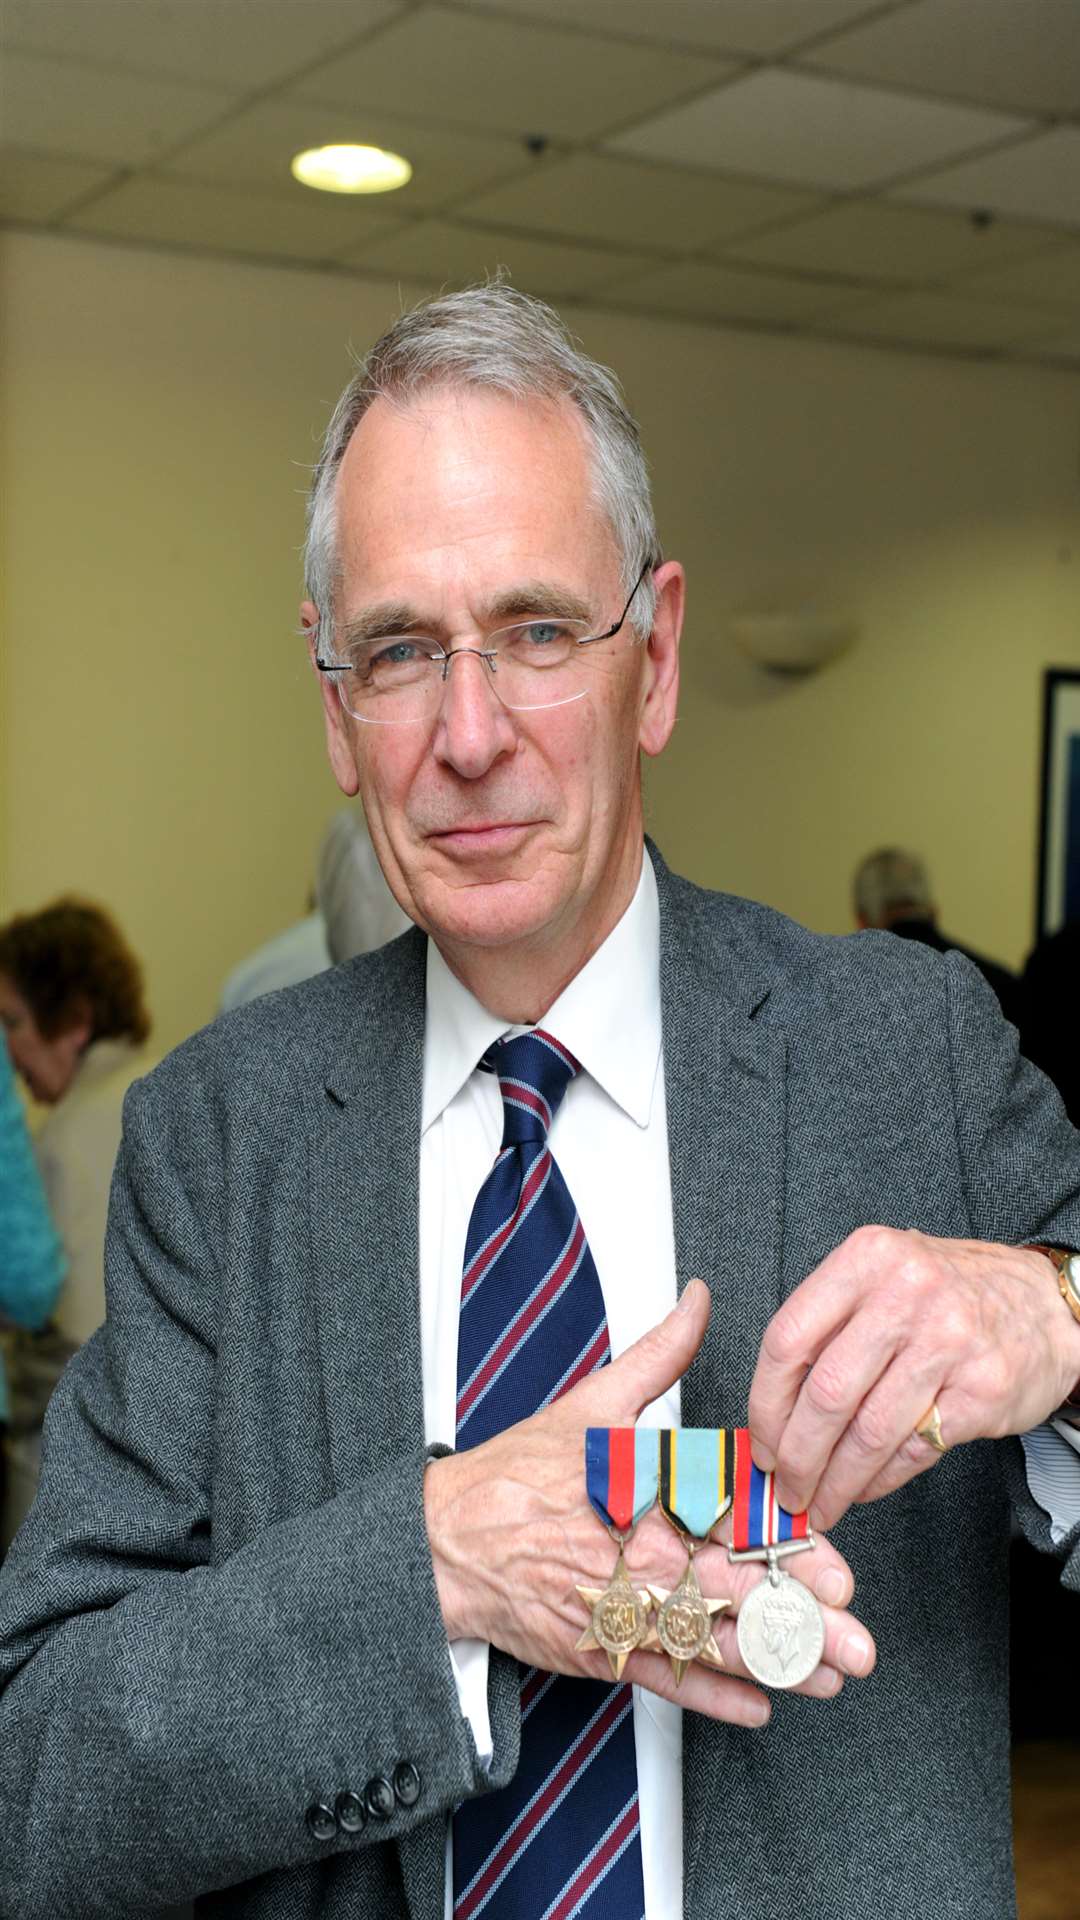 Chris Kerr with his uncle Gerald Kerr's medals, who served in the 610 squadron